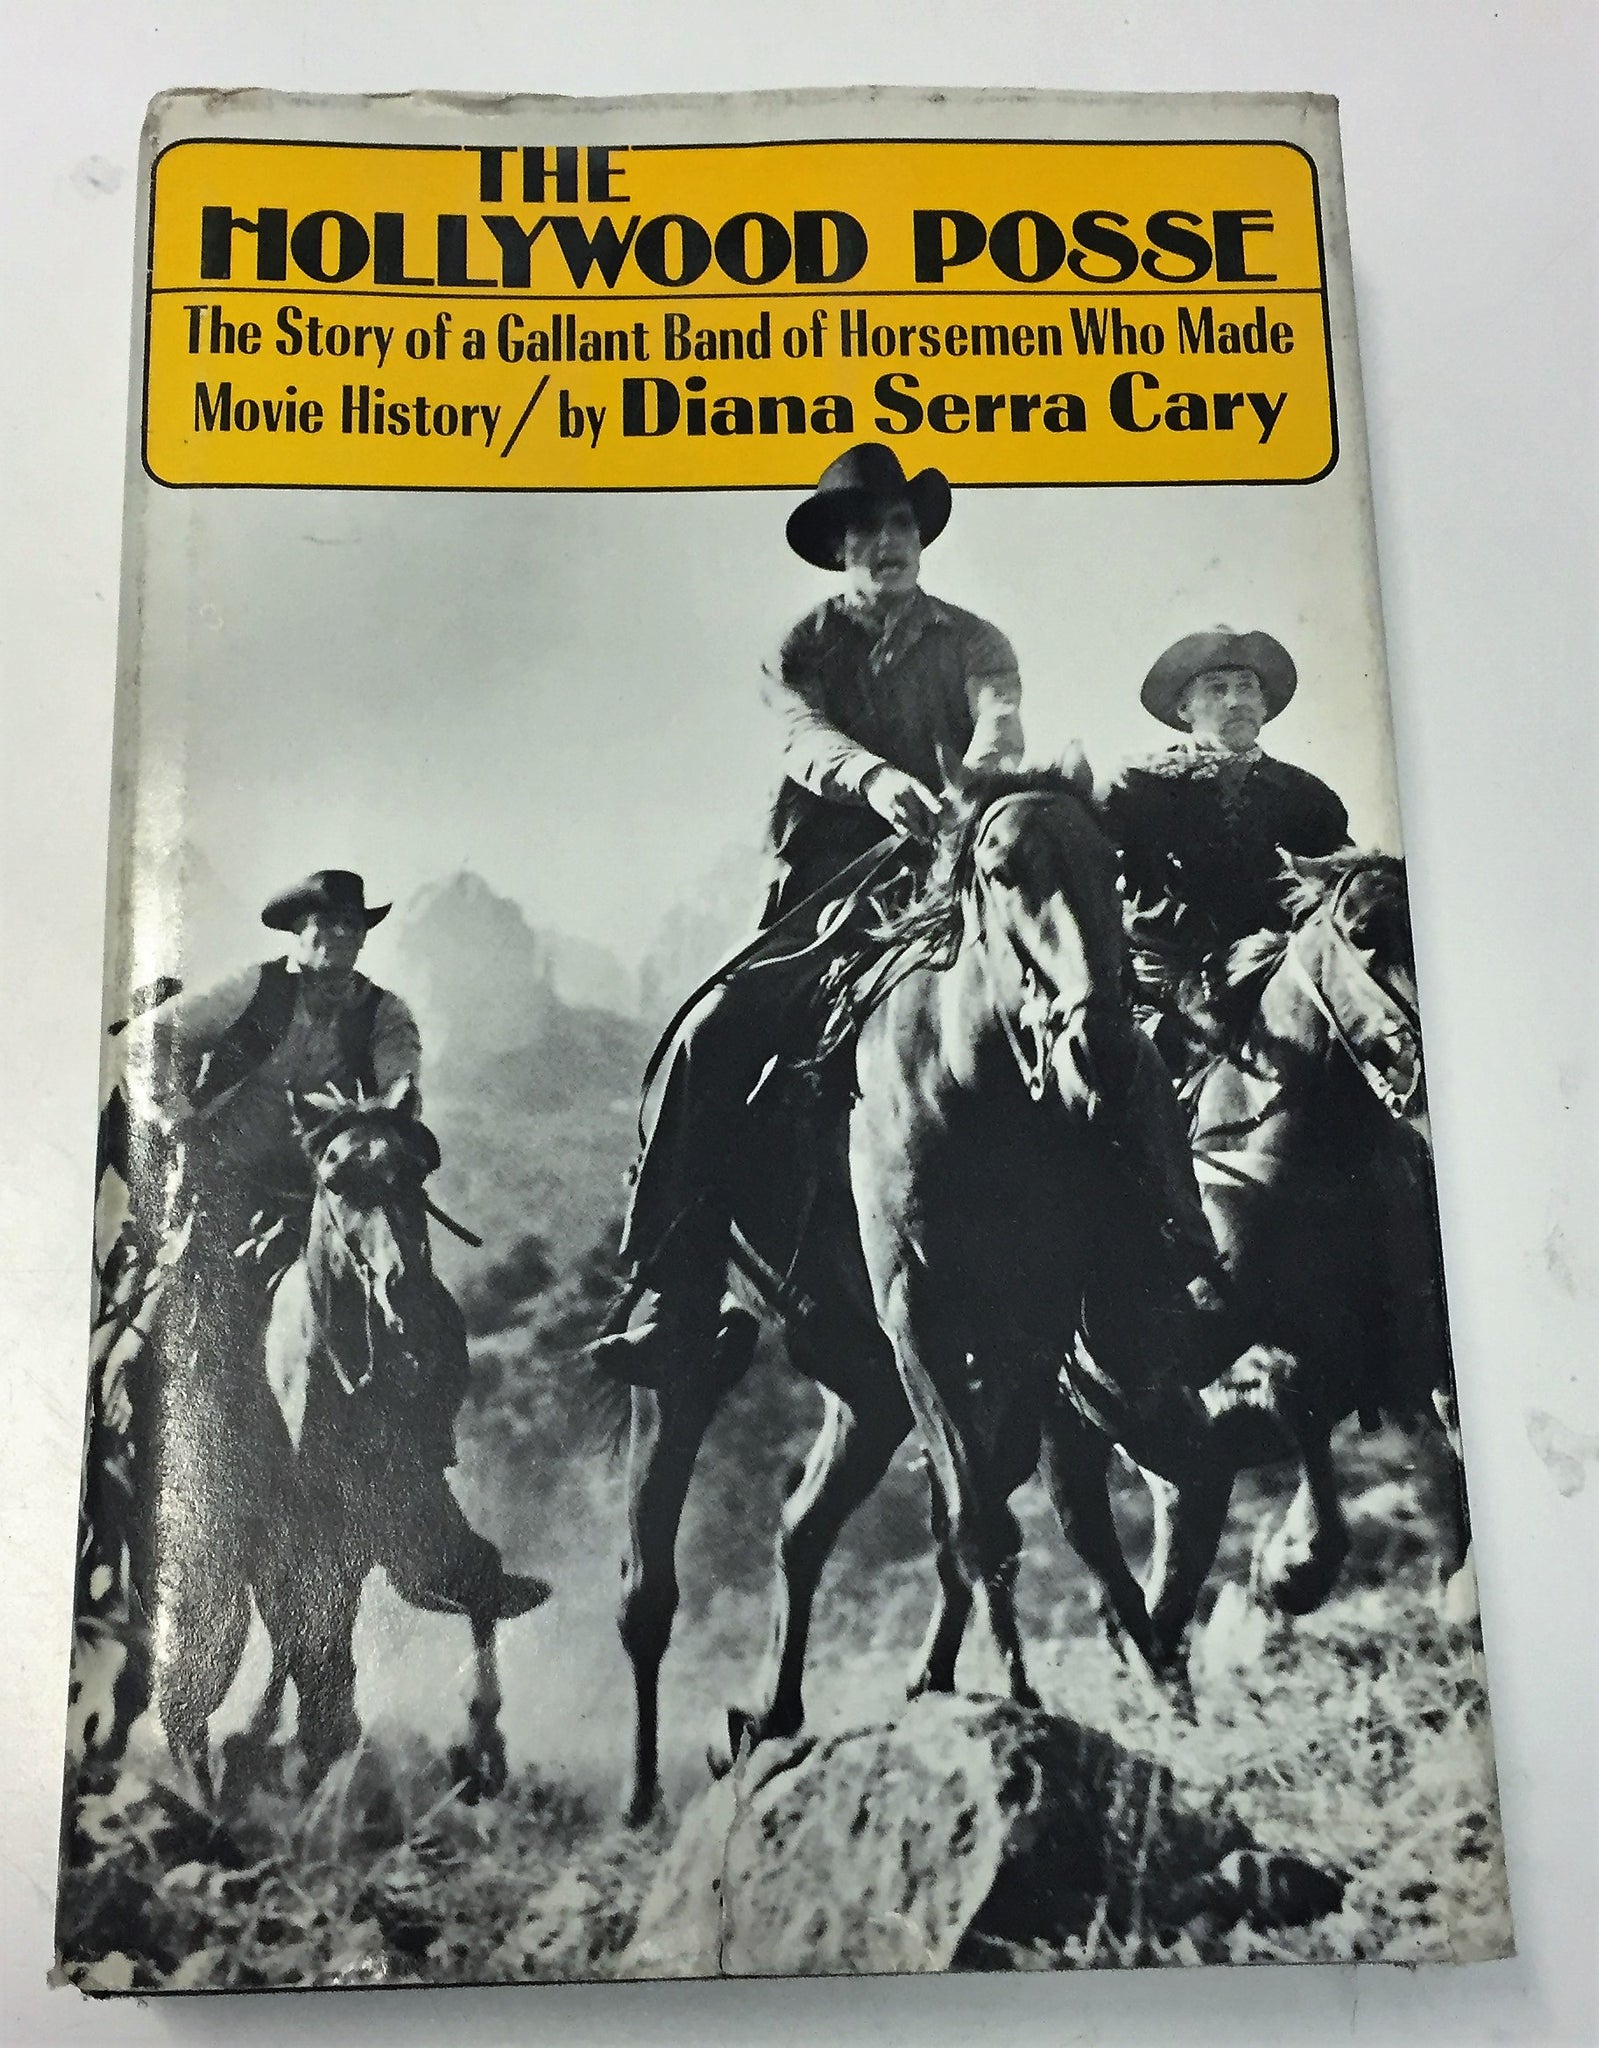 The Hollywood Posse Story Of Gallant Band Of Horsemen By Diana Serra Cary